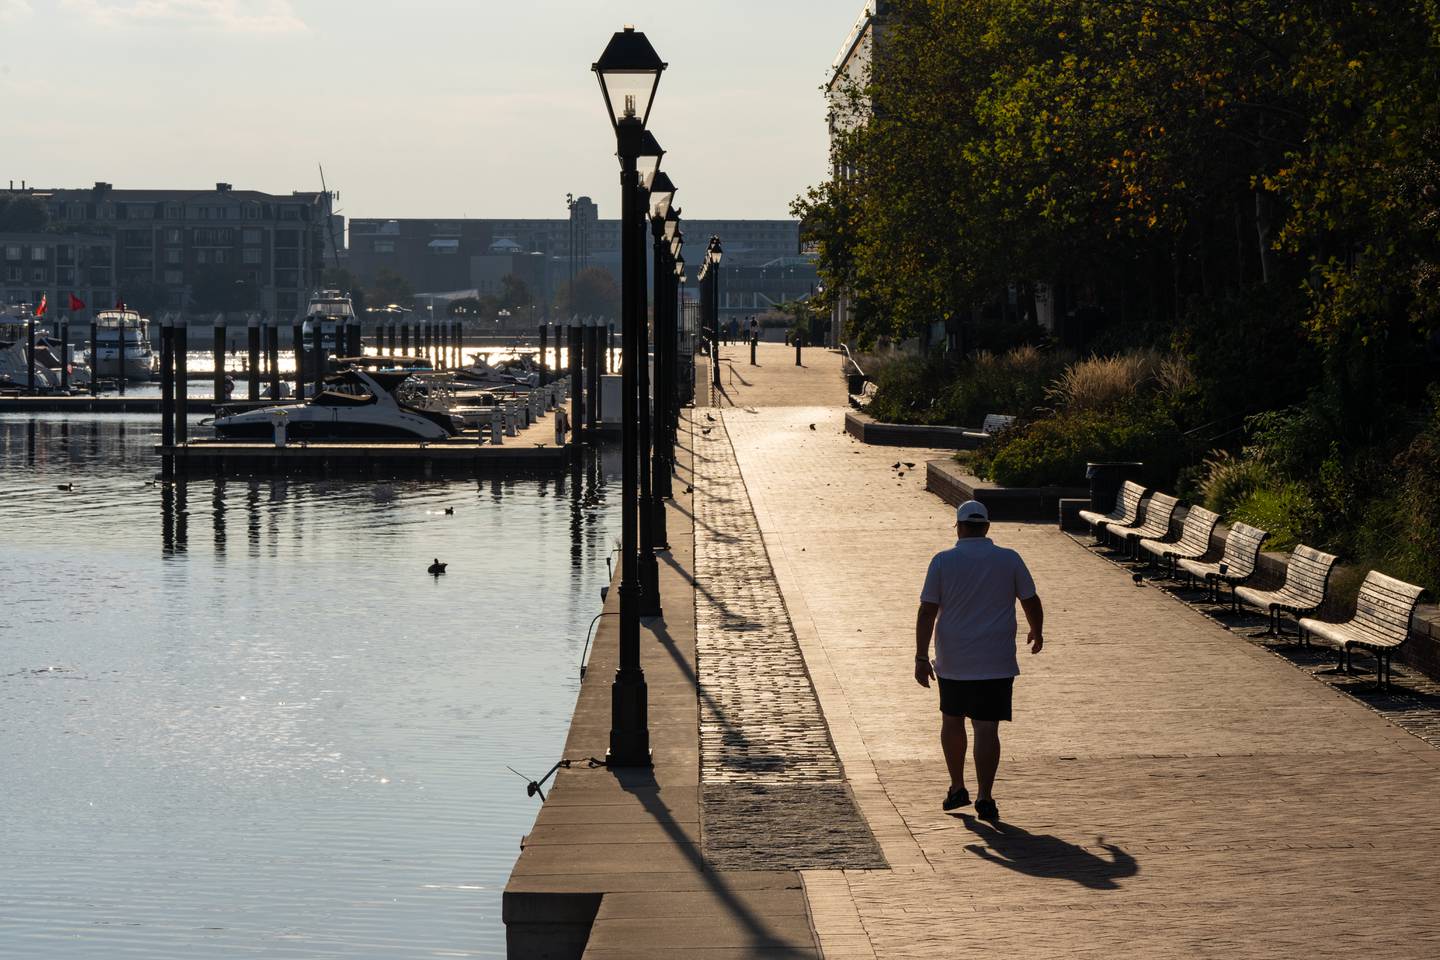 A silhouetted man walks along the harbor with nobody else in sight. Street lights divide the photo in half between the water and the walkway.